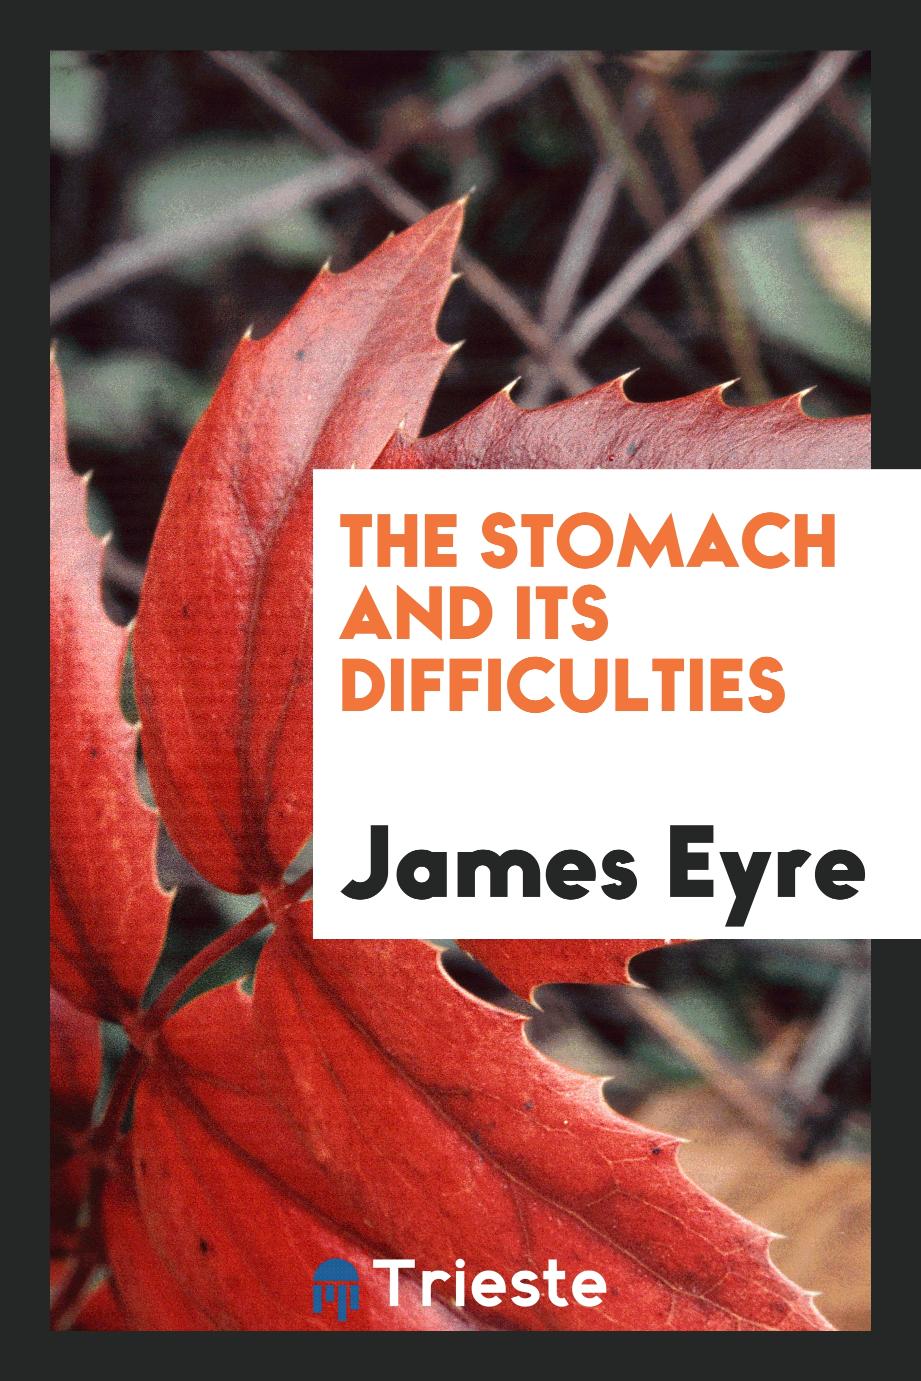 The Stomach and its Difficulties